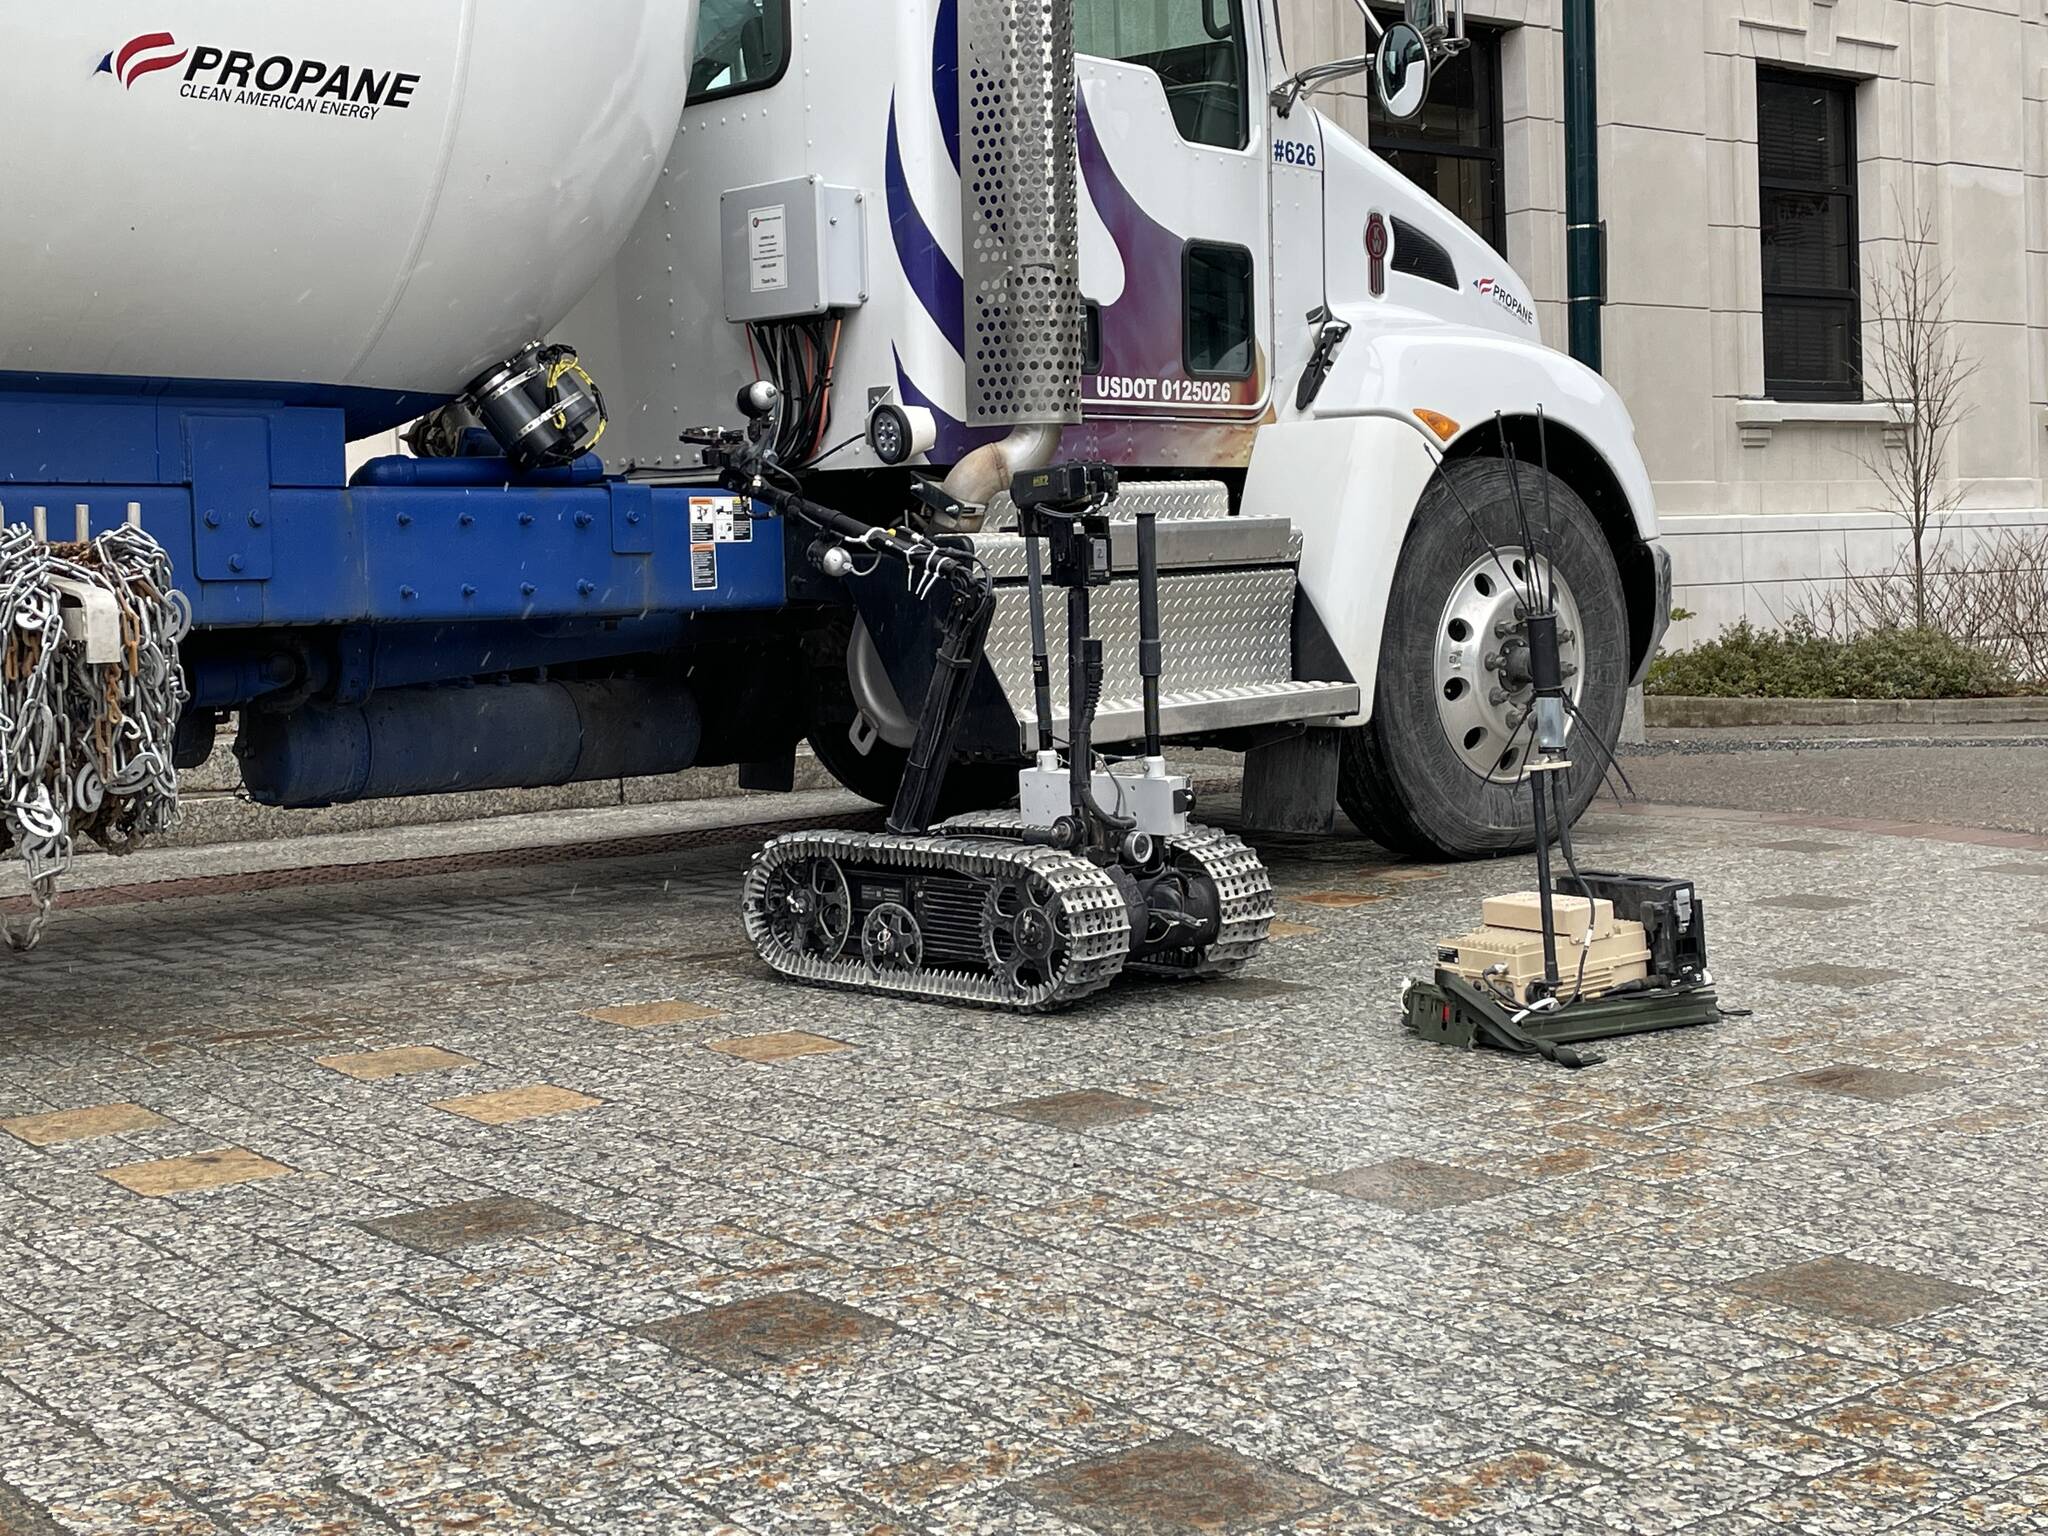 A Navy TALON robot examines a simulated vehicle-borne improvised explosive device in front of the Alaska State Capitol on March 10, 2022. (Michael S. Lockett / Juneau Empire)